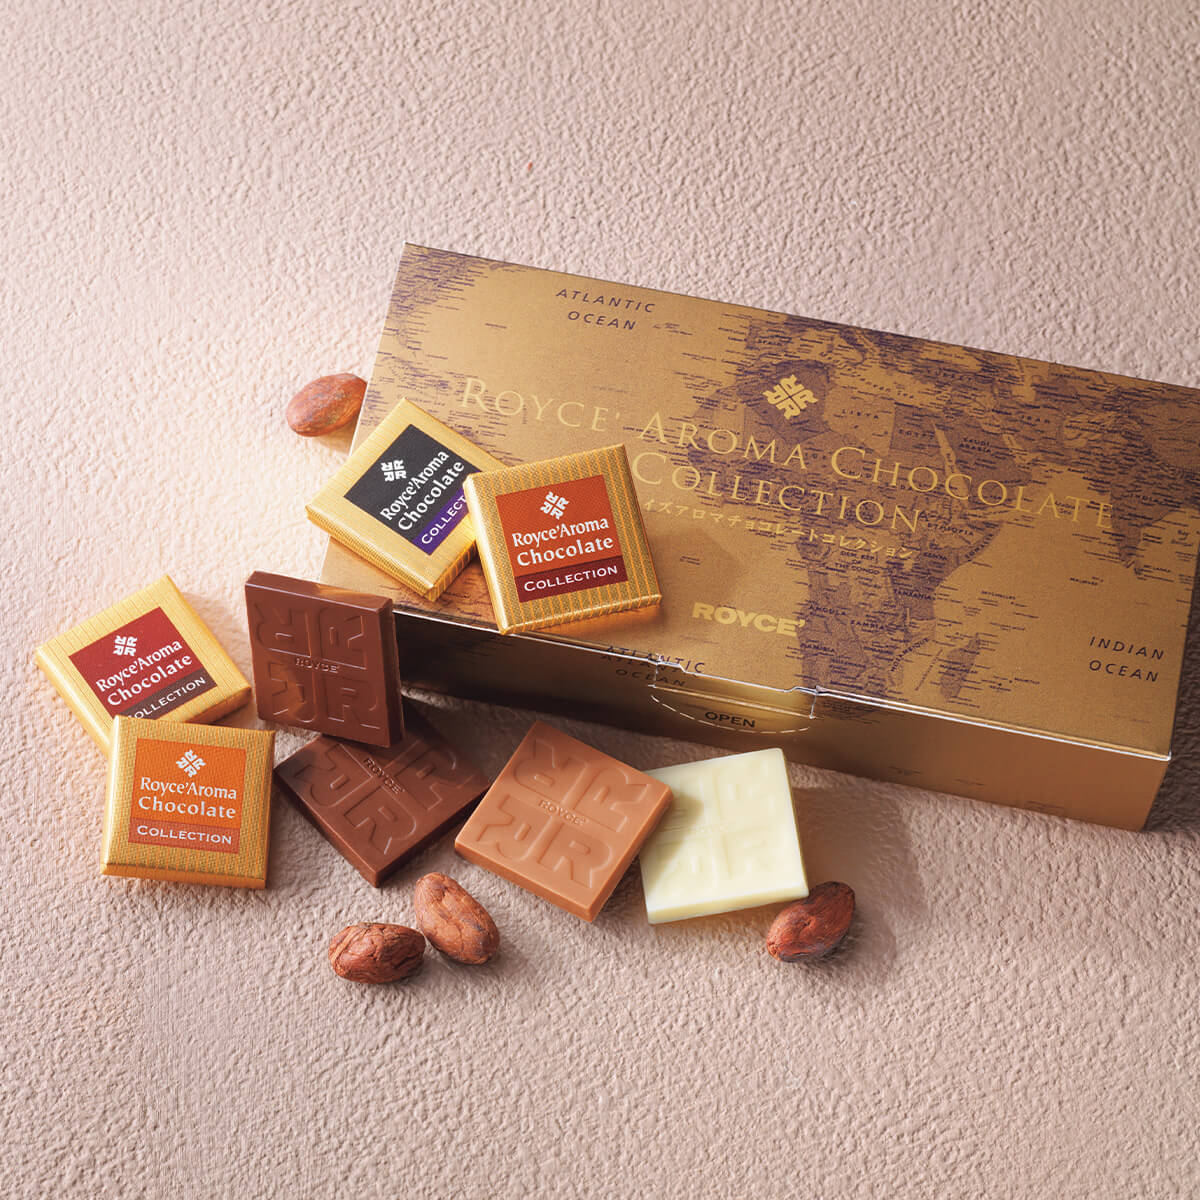 ROYCE' Chocolate - Image shows a brown printed chocolate box labeled ROYCE' Aroma Chocolate Collection with accents of chocolate squares and loose cacao beans.